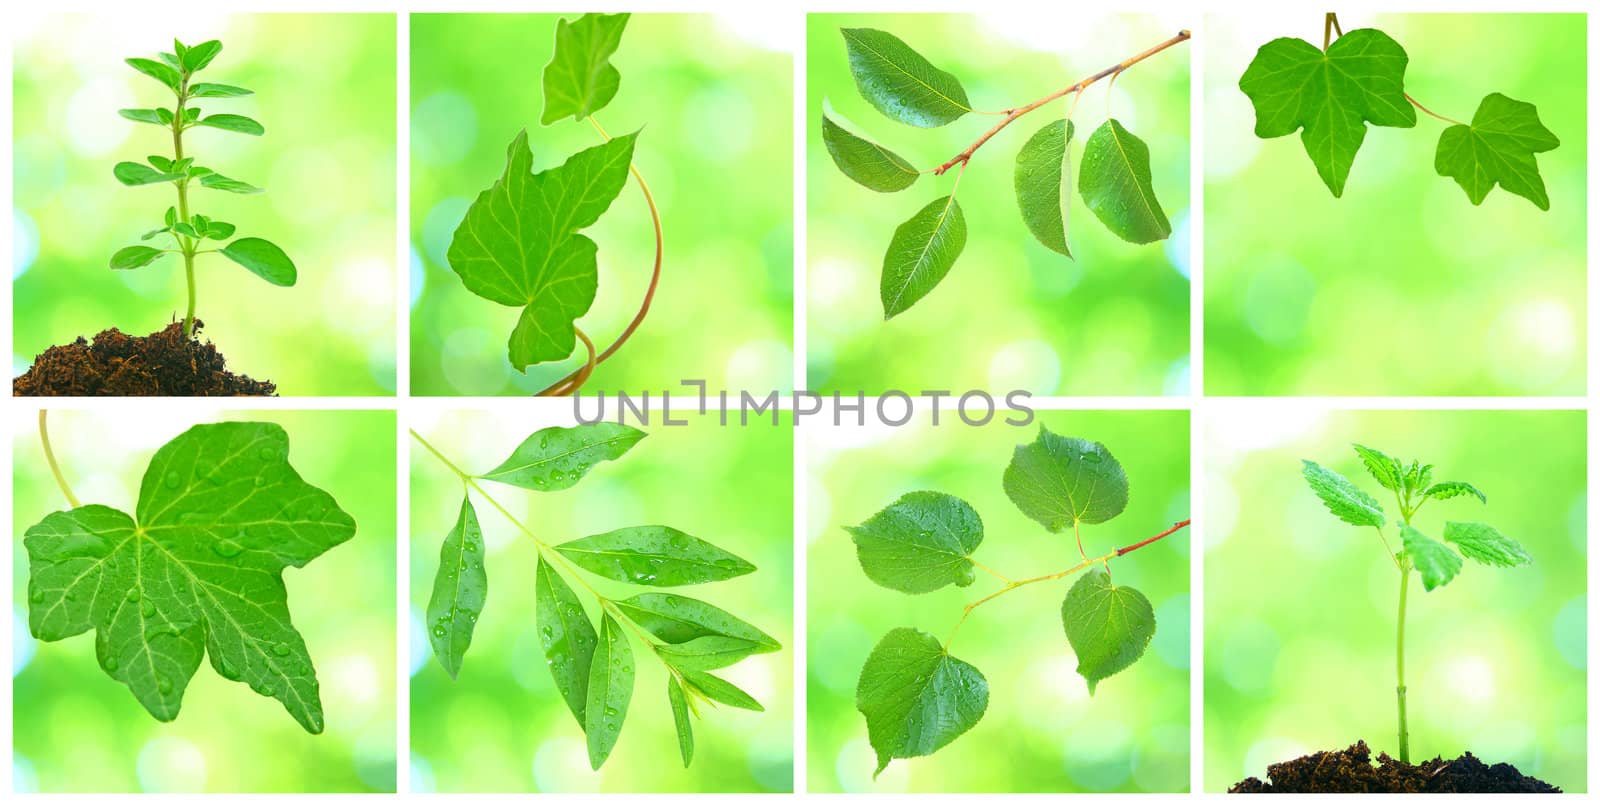 Collage of grenn leaves in spring by juweber